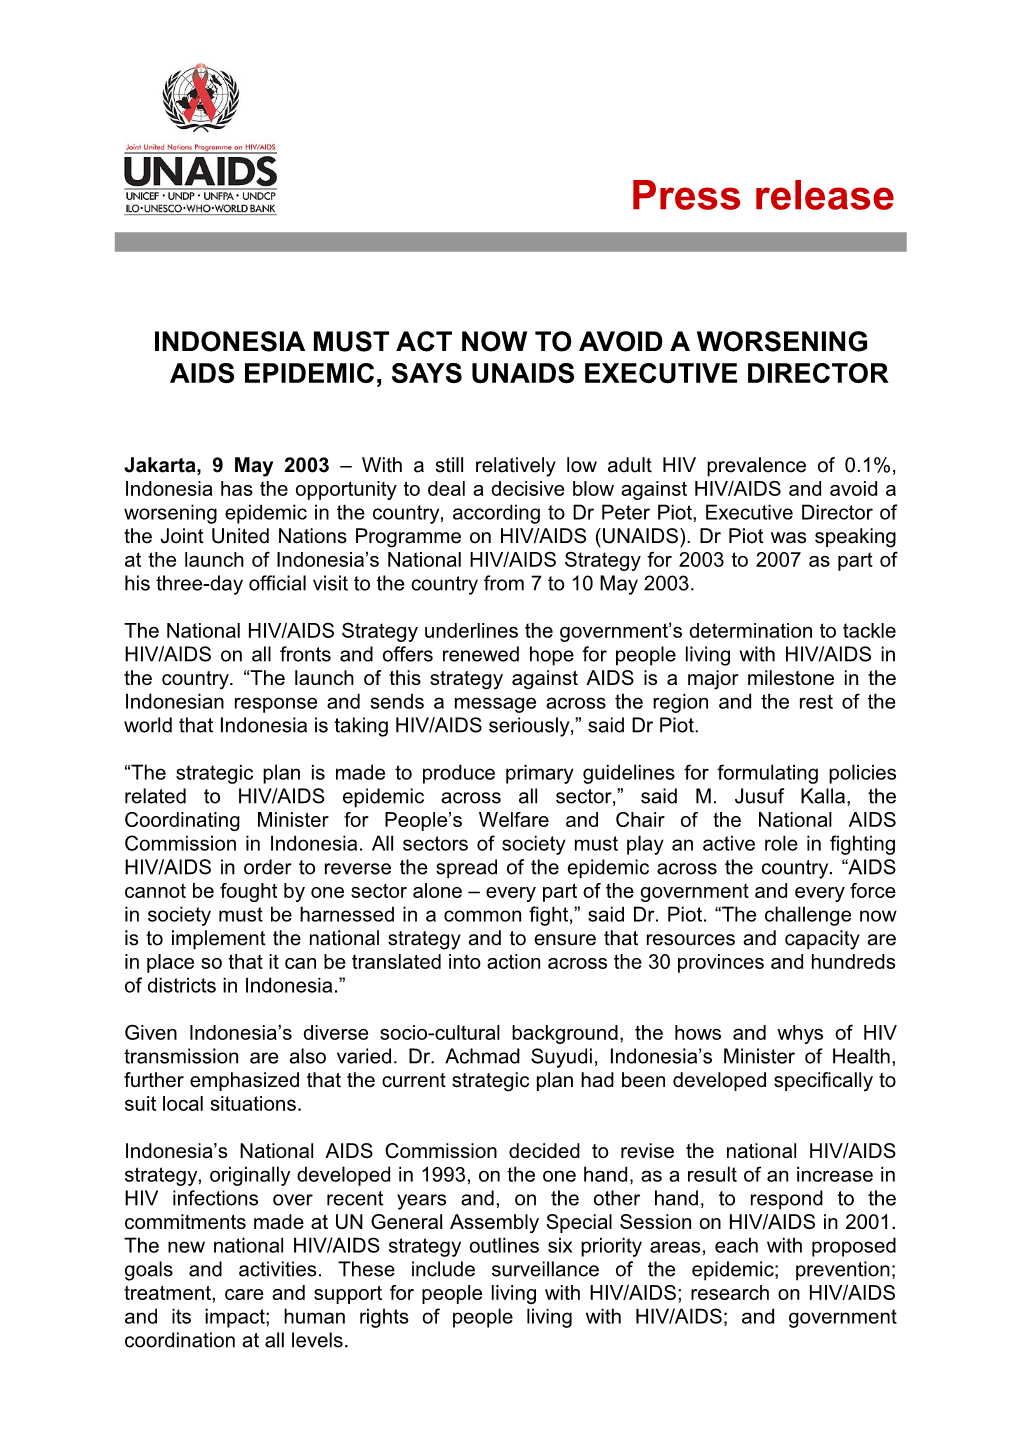 Indonesia Must Act Now to Avoid a Worsening AIDS Epidemic, Says UNAIDS Executive Director